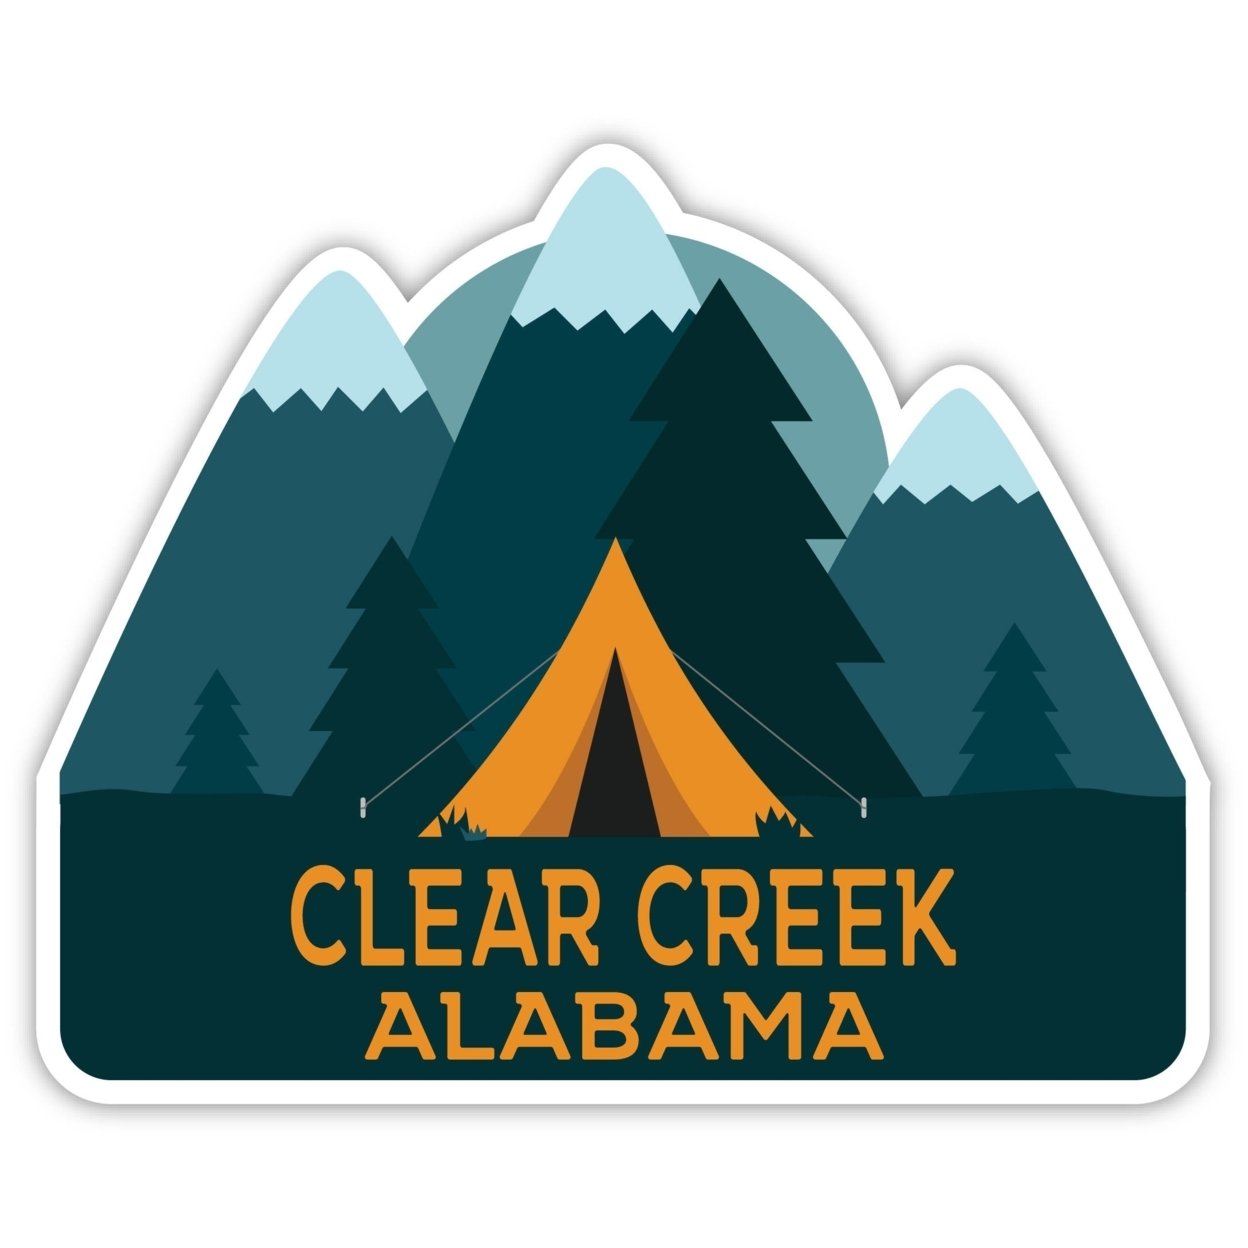 Clear Creek Alabama Souvenir Decorative Stickers (Choose Theme And Size) - 4-Pack, 12-Inch, Tent